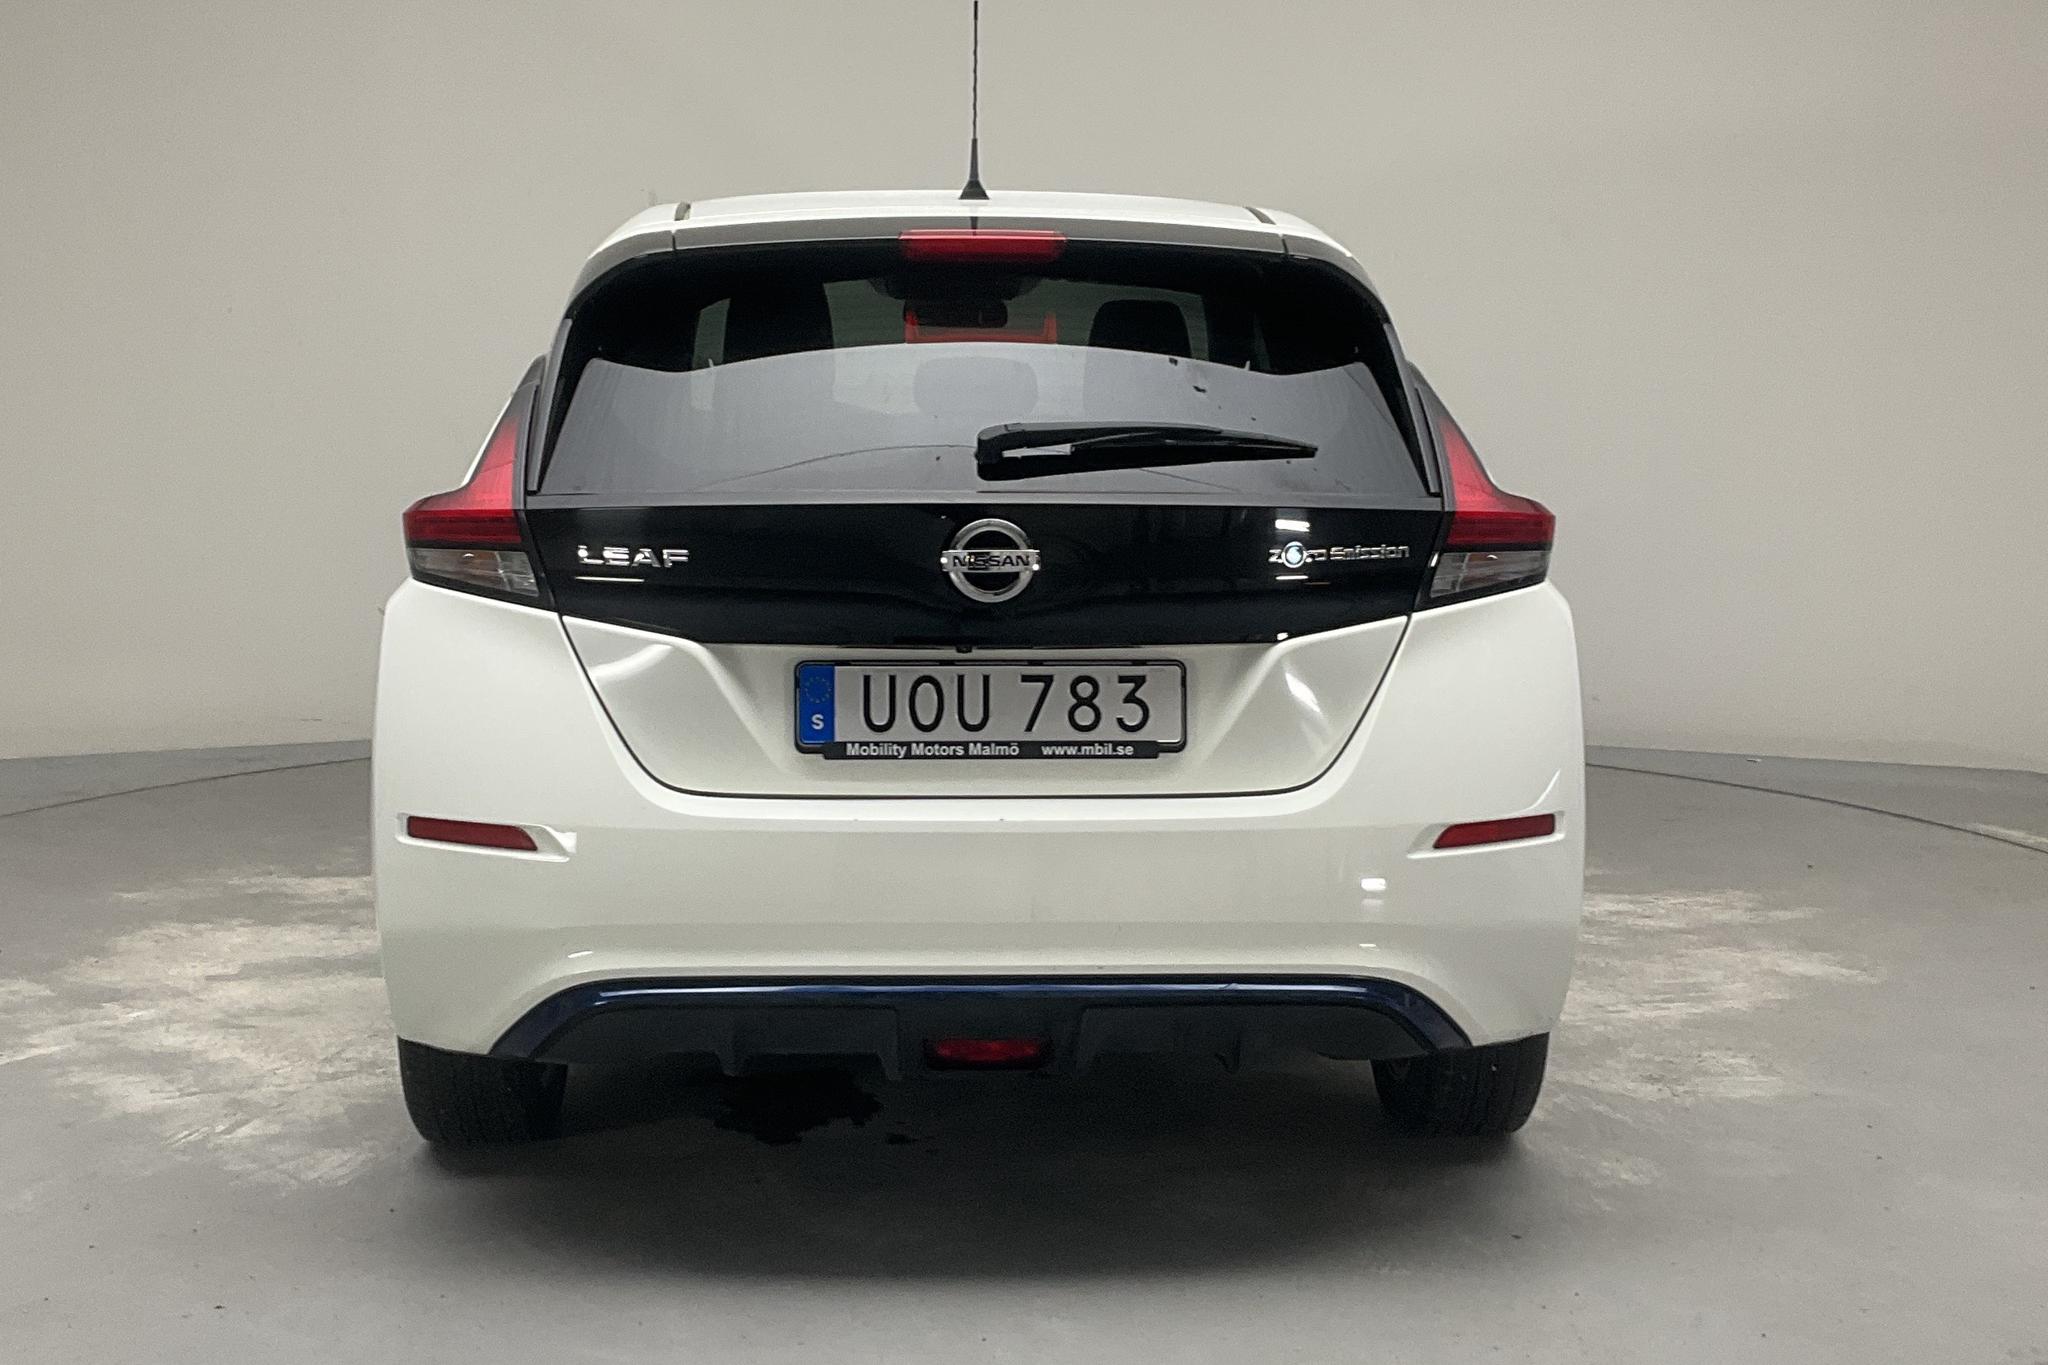 Nissan LEAF 5dr 39 kWh (150hk) - 71 960 km - Automatic - white - 2019